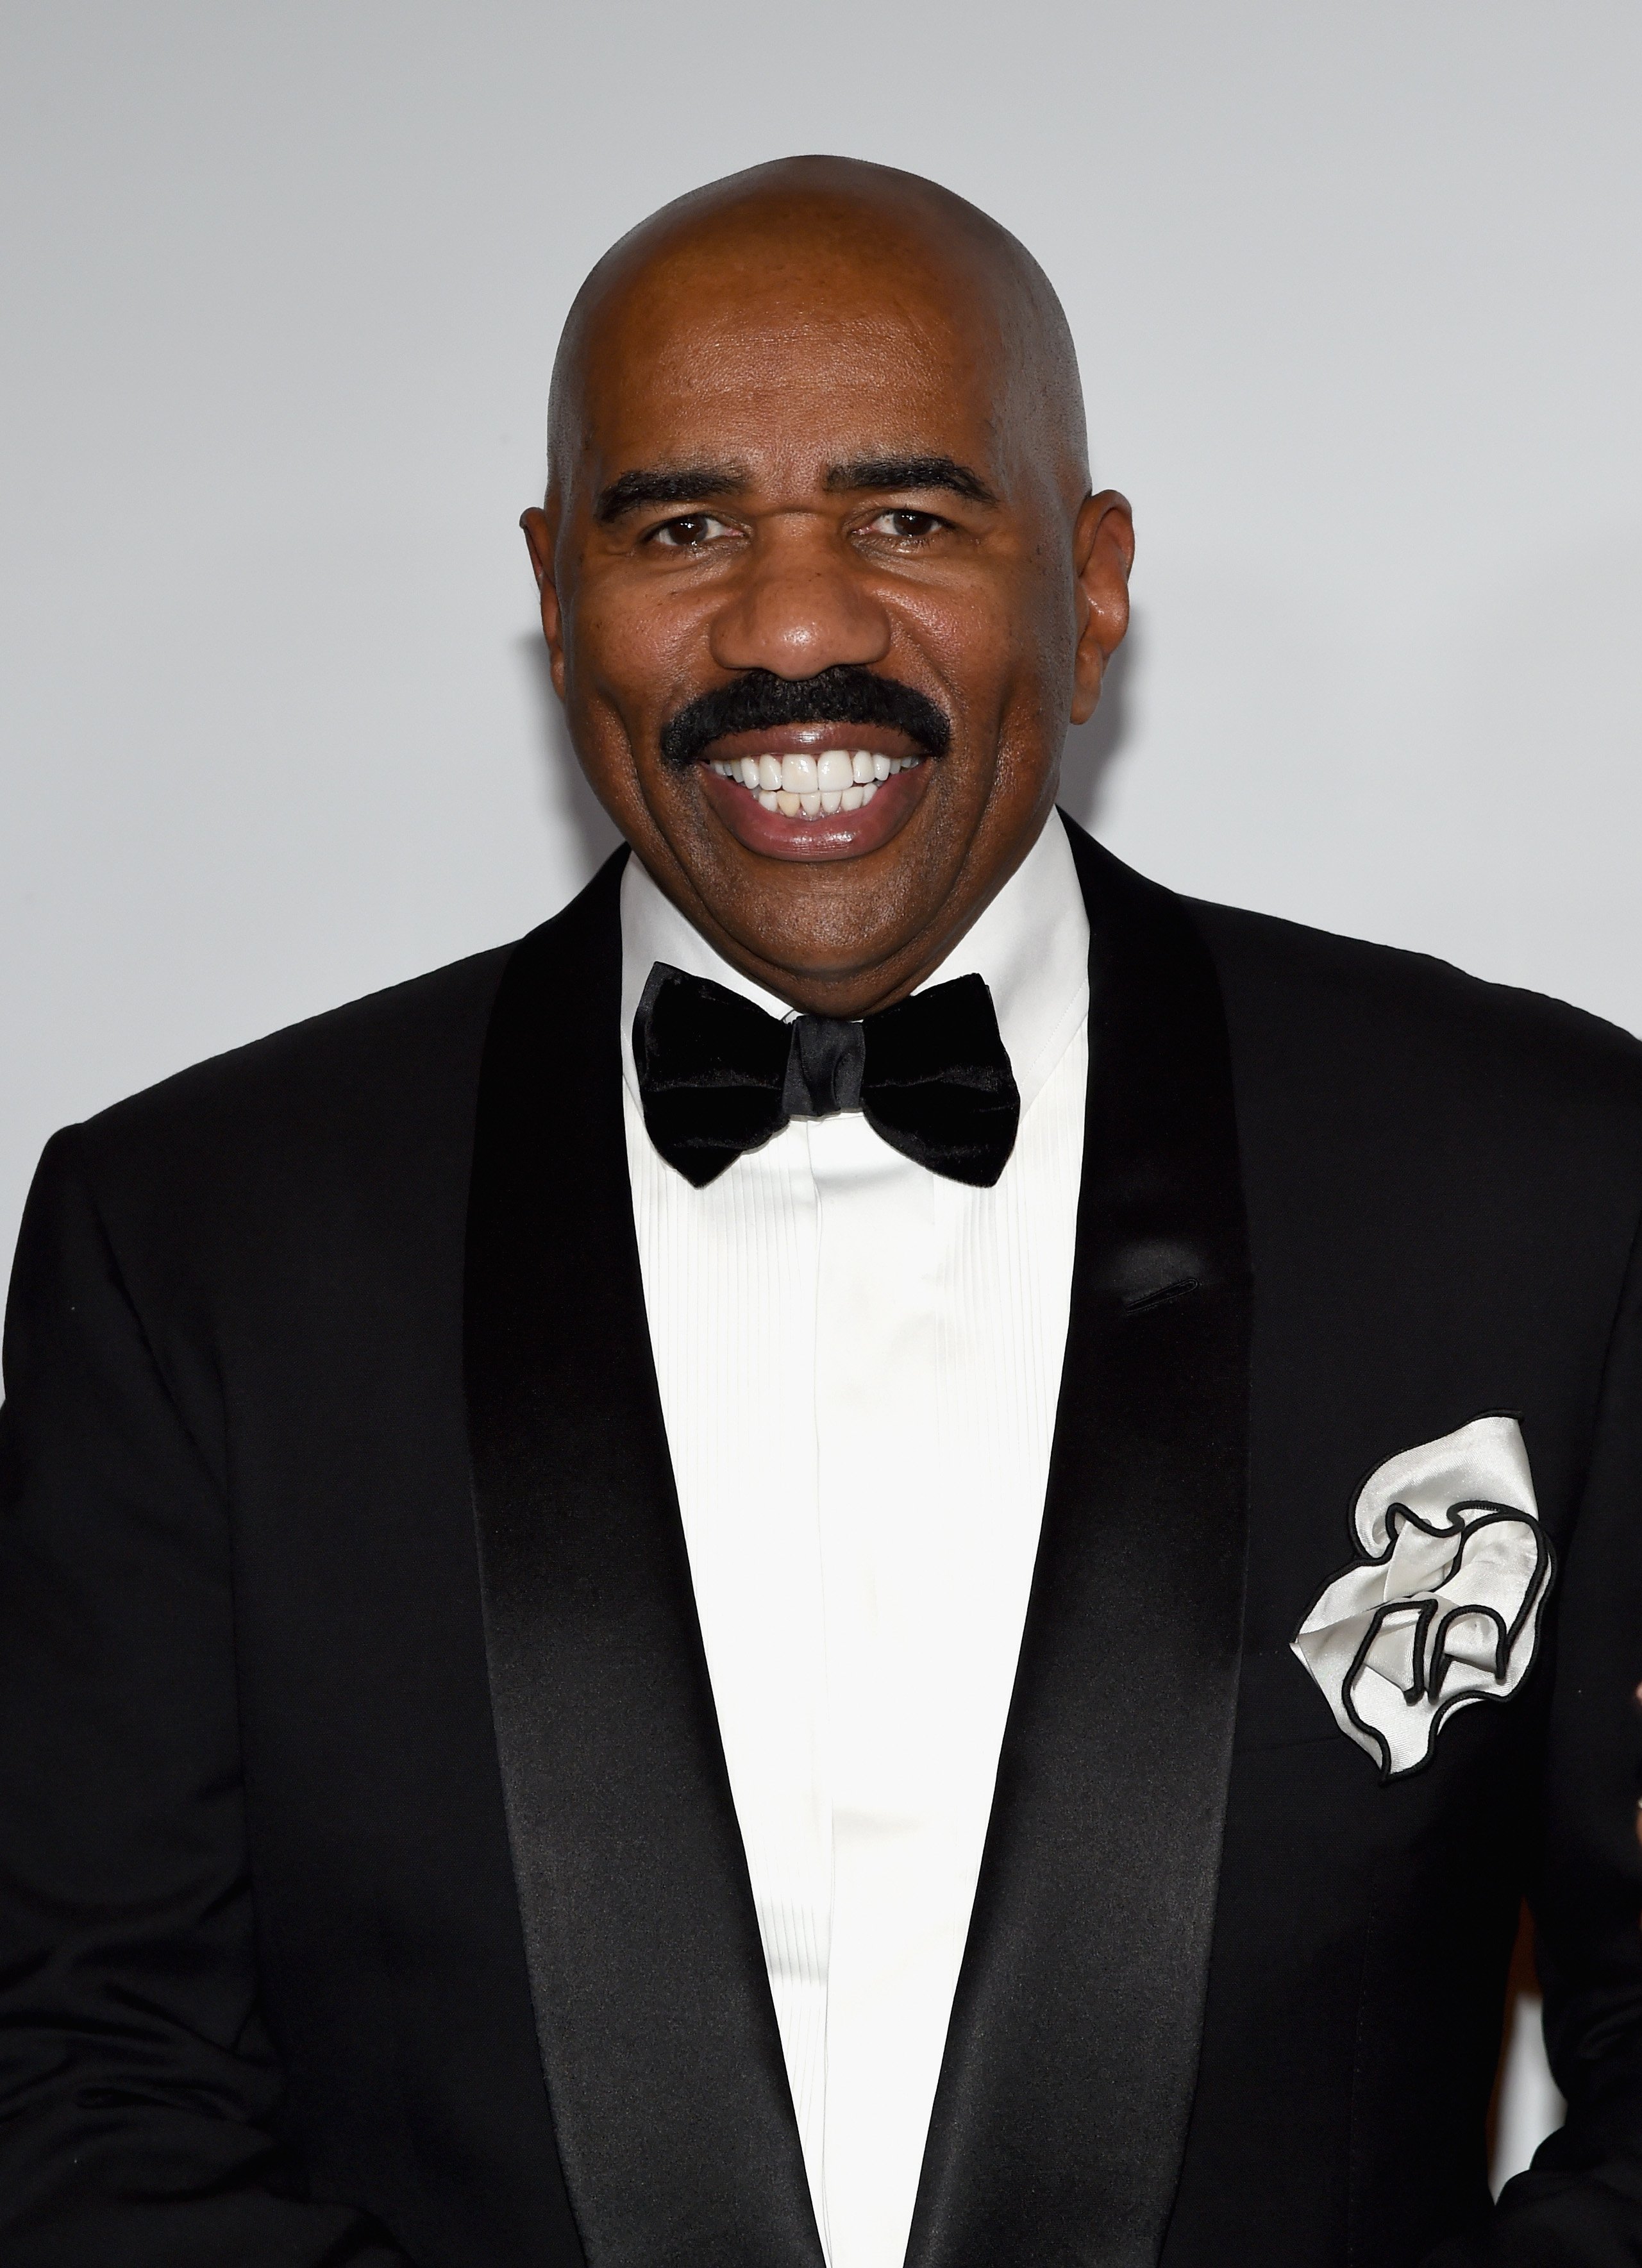 Steve Harvey at the 2015 Miss Universe Pageant at Planet Hollywood Resort & Casino on December 20, 2015 in Las Vegas, Nevada | Photo: Getty Images